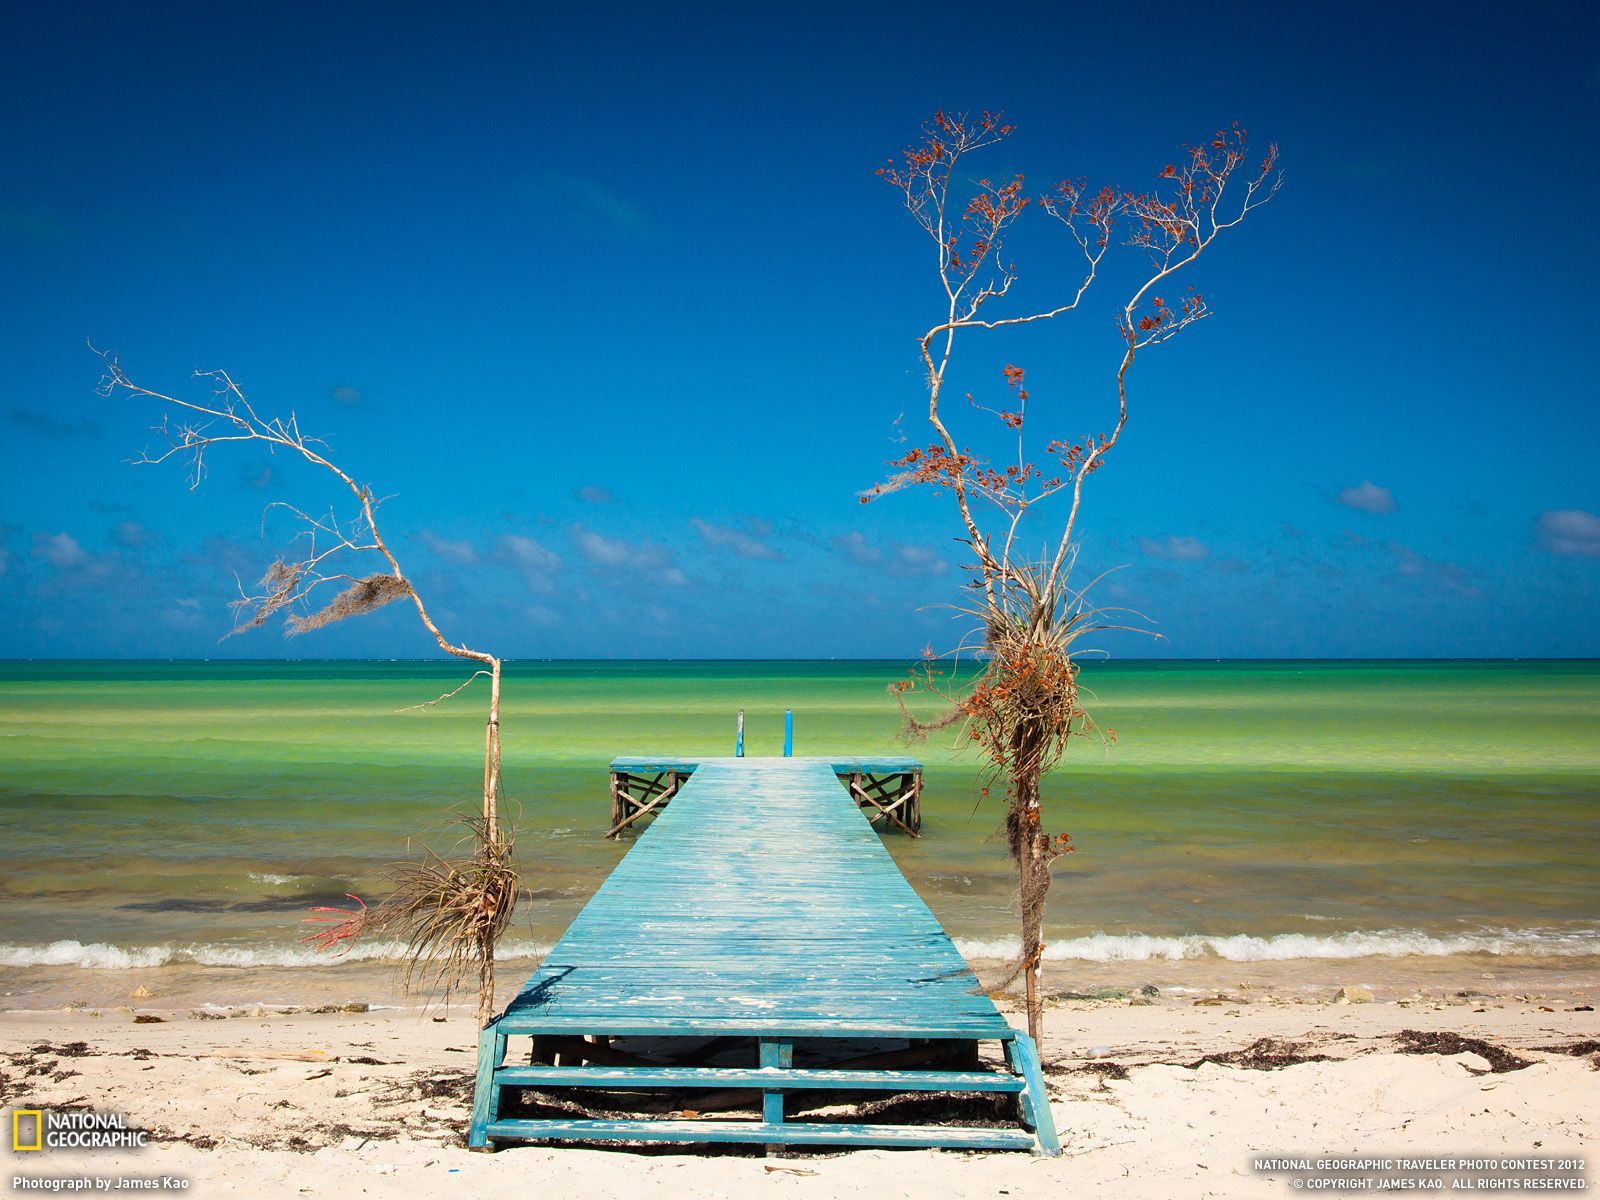 Cuba Picture Beach Wallpaper - National Geographic Photo of the Day